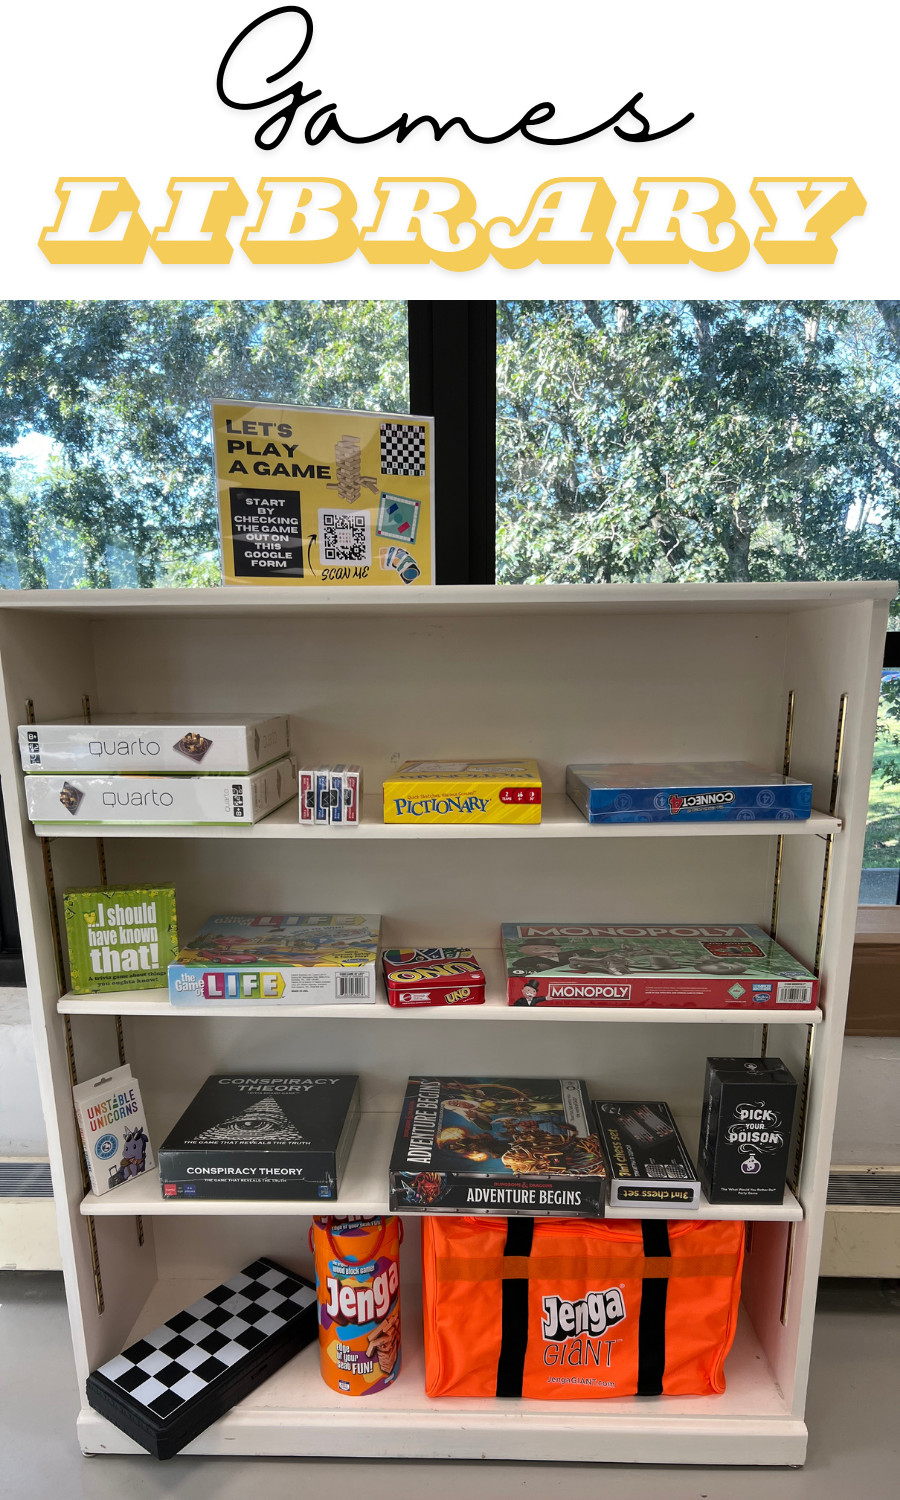 Photograph of a bookshelf with board games